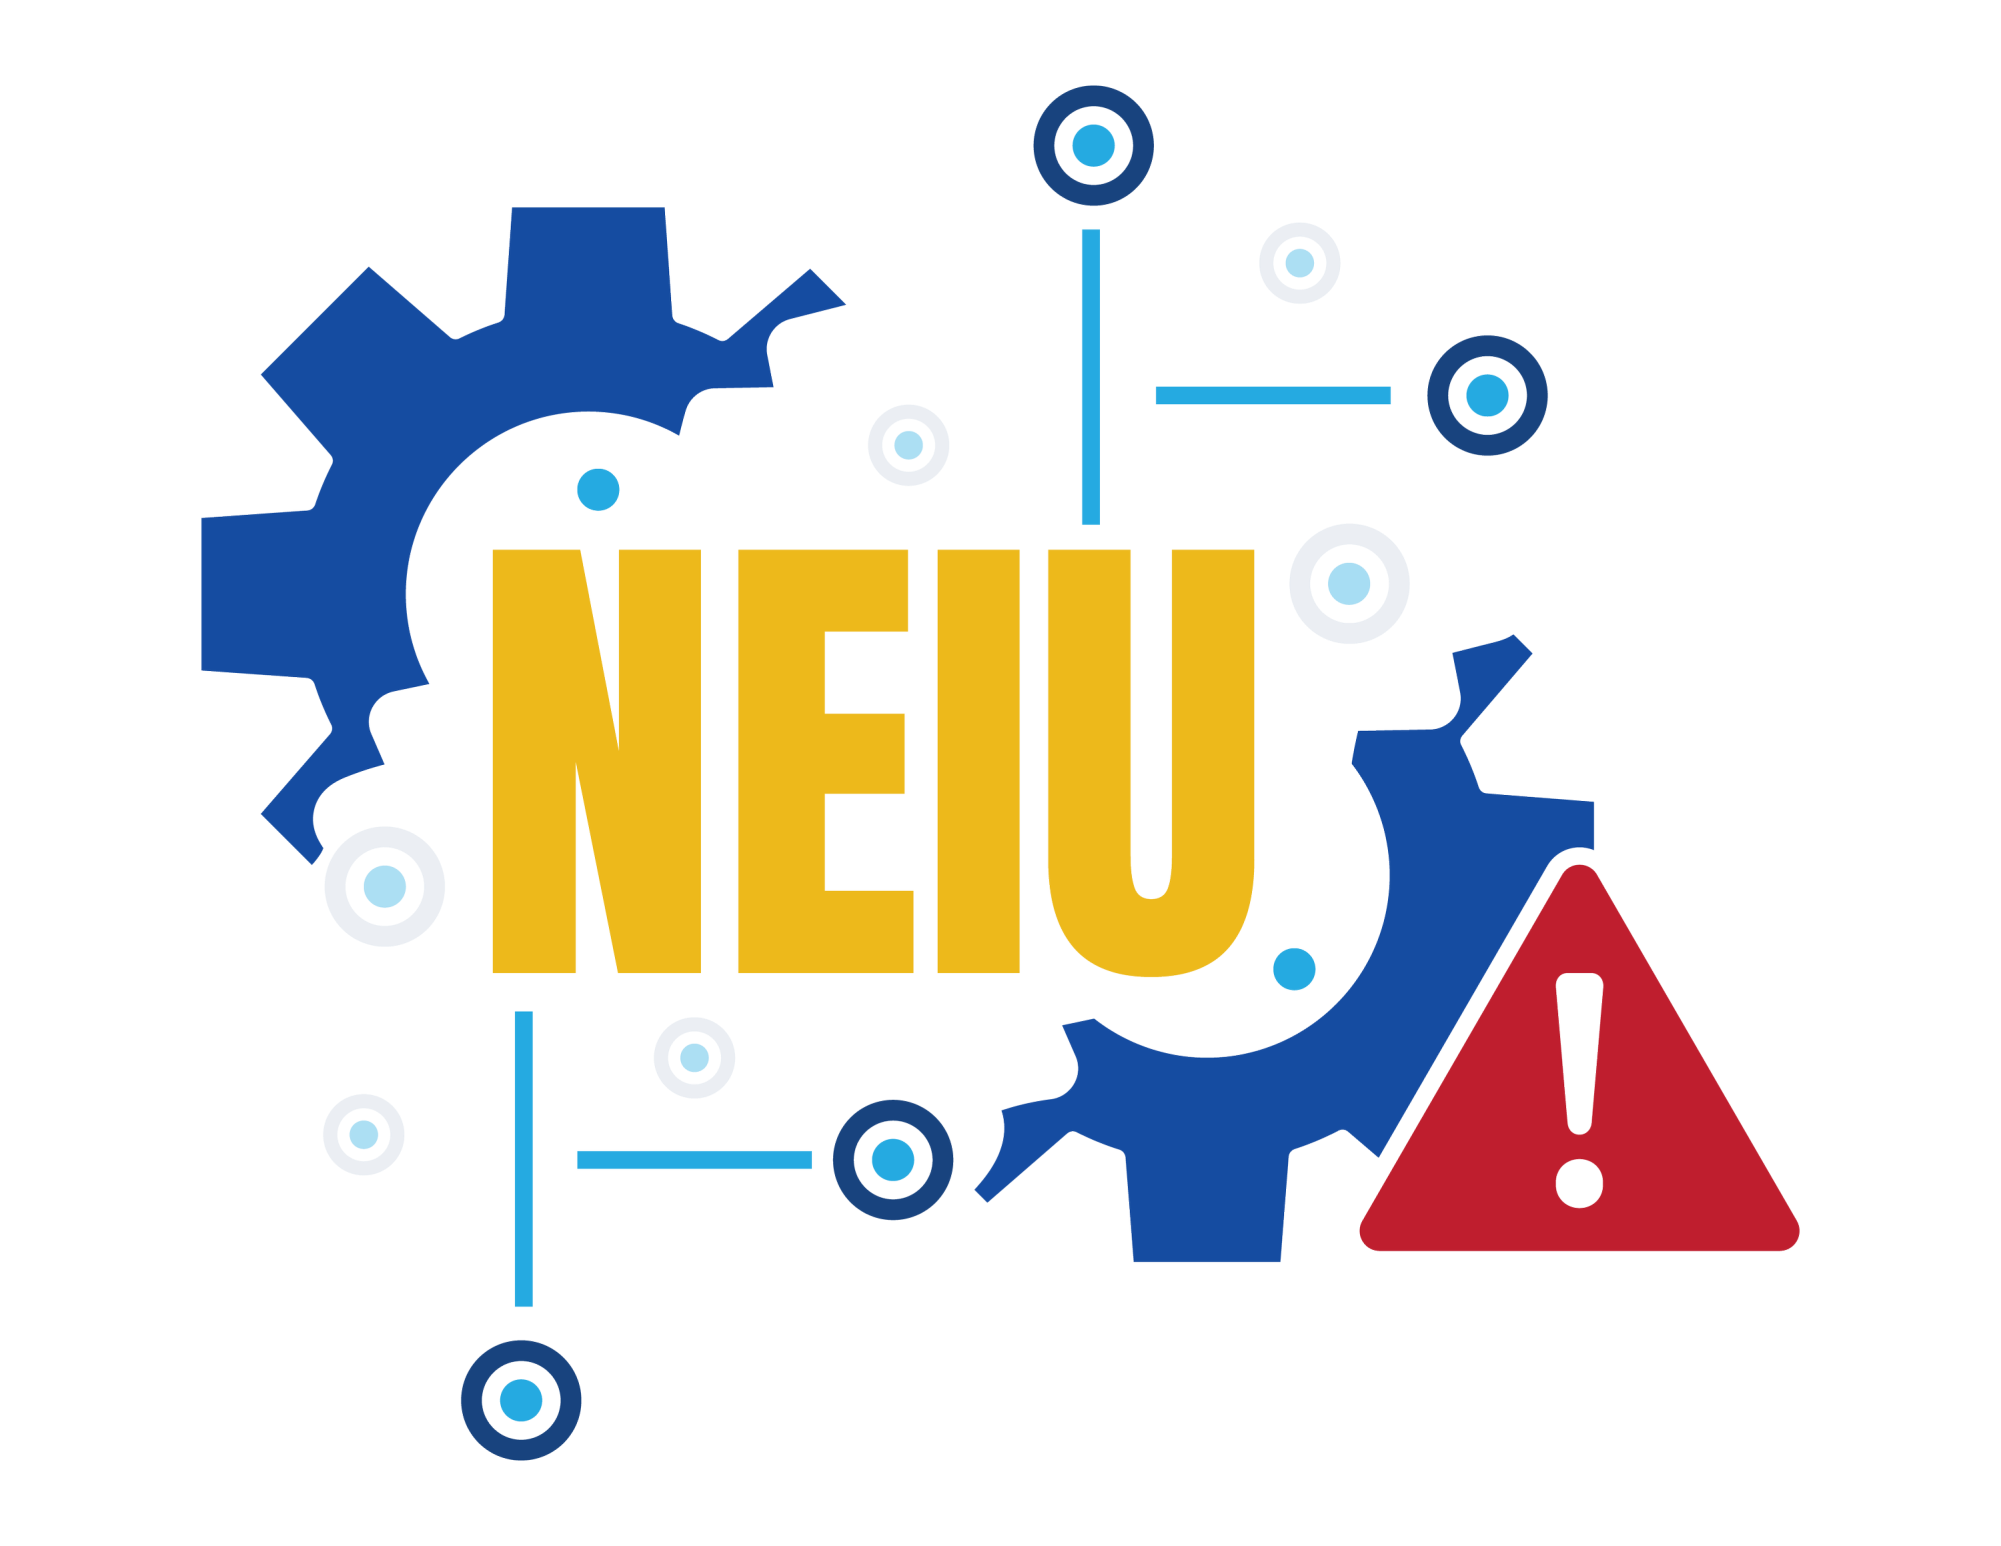 Letter NEIU in the middle surrounded by circles representing connectivity. The Side of letters contain a broken wheel indicating disruption.